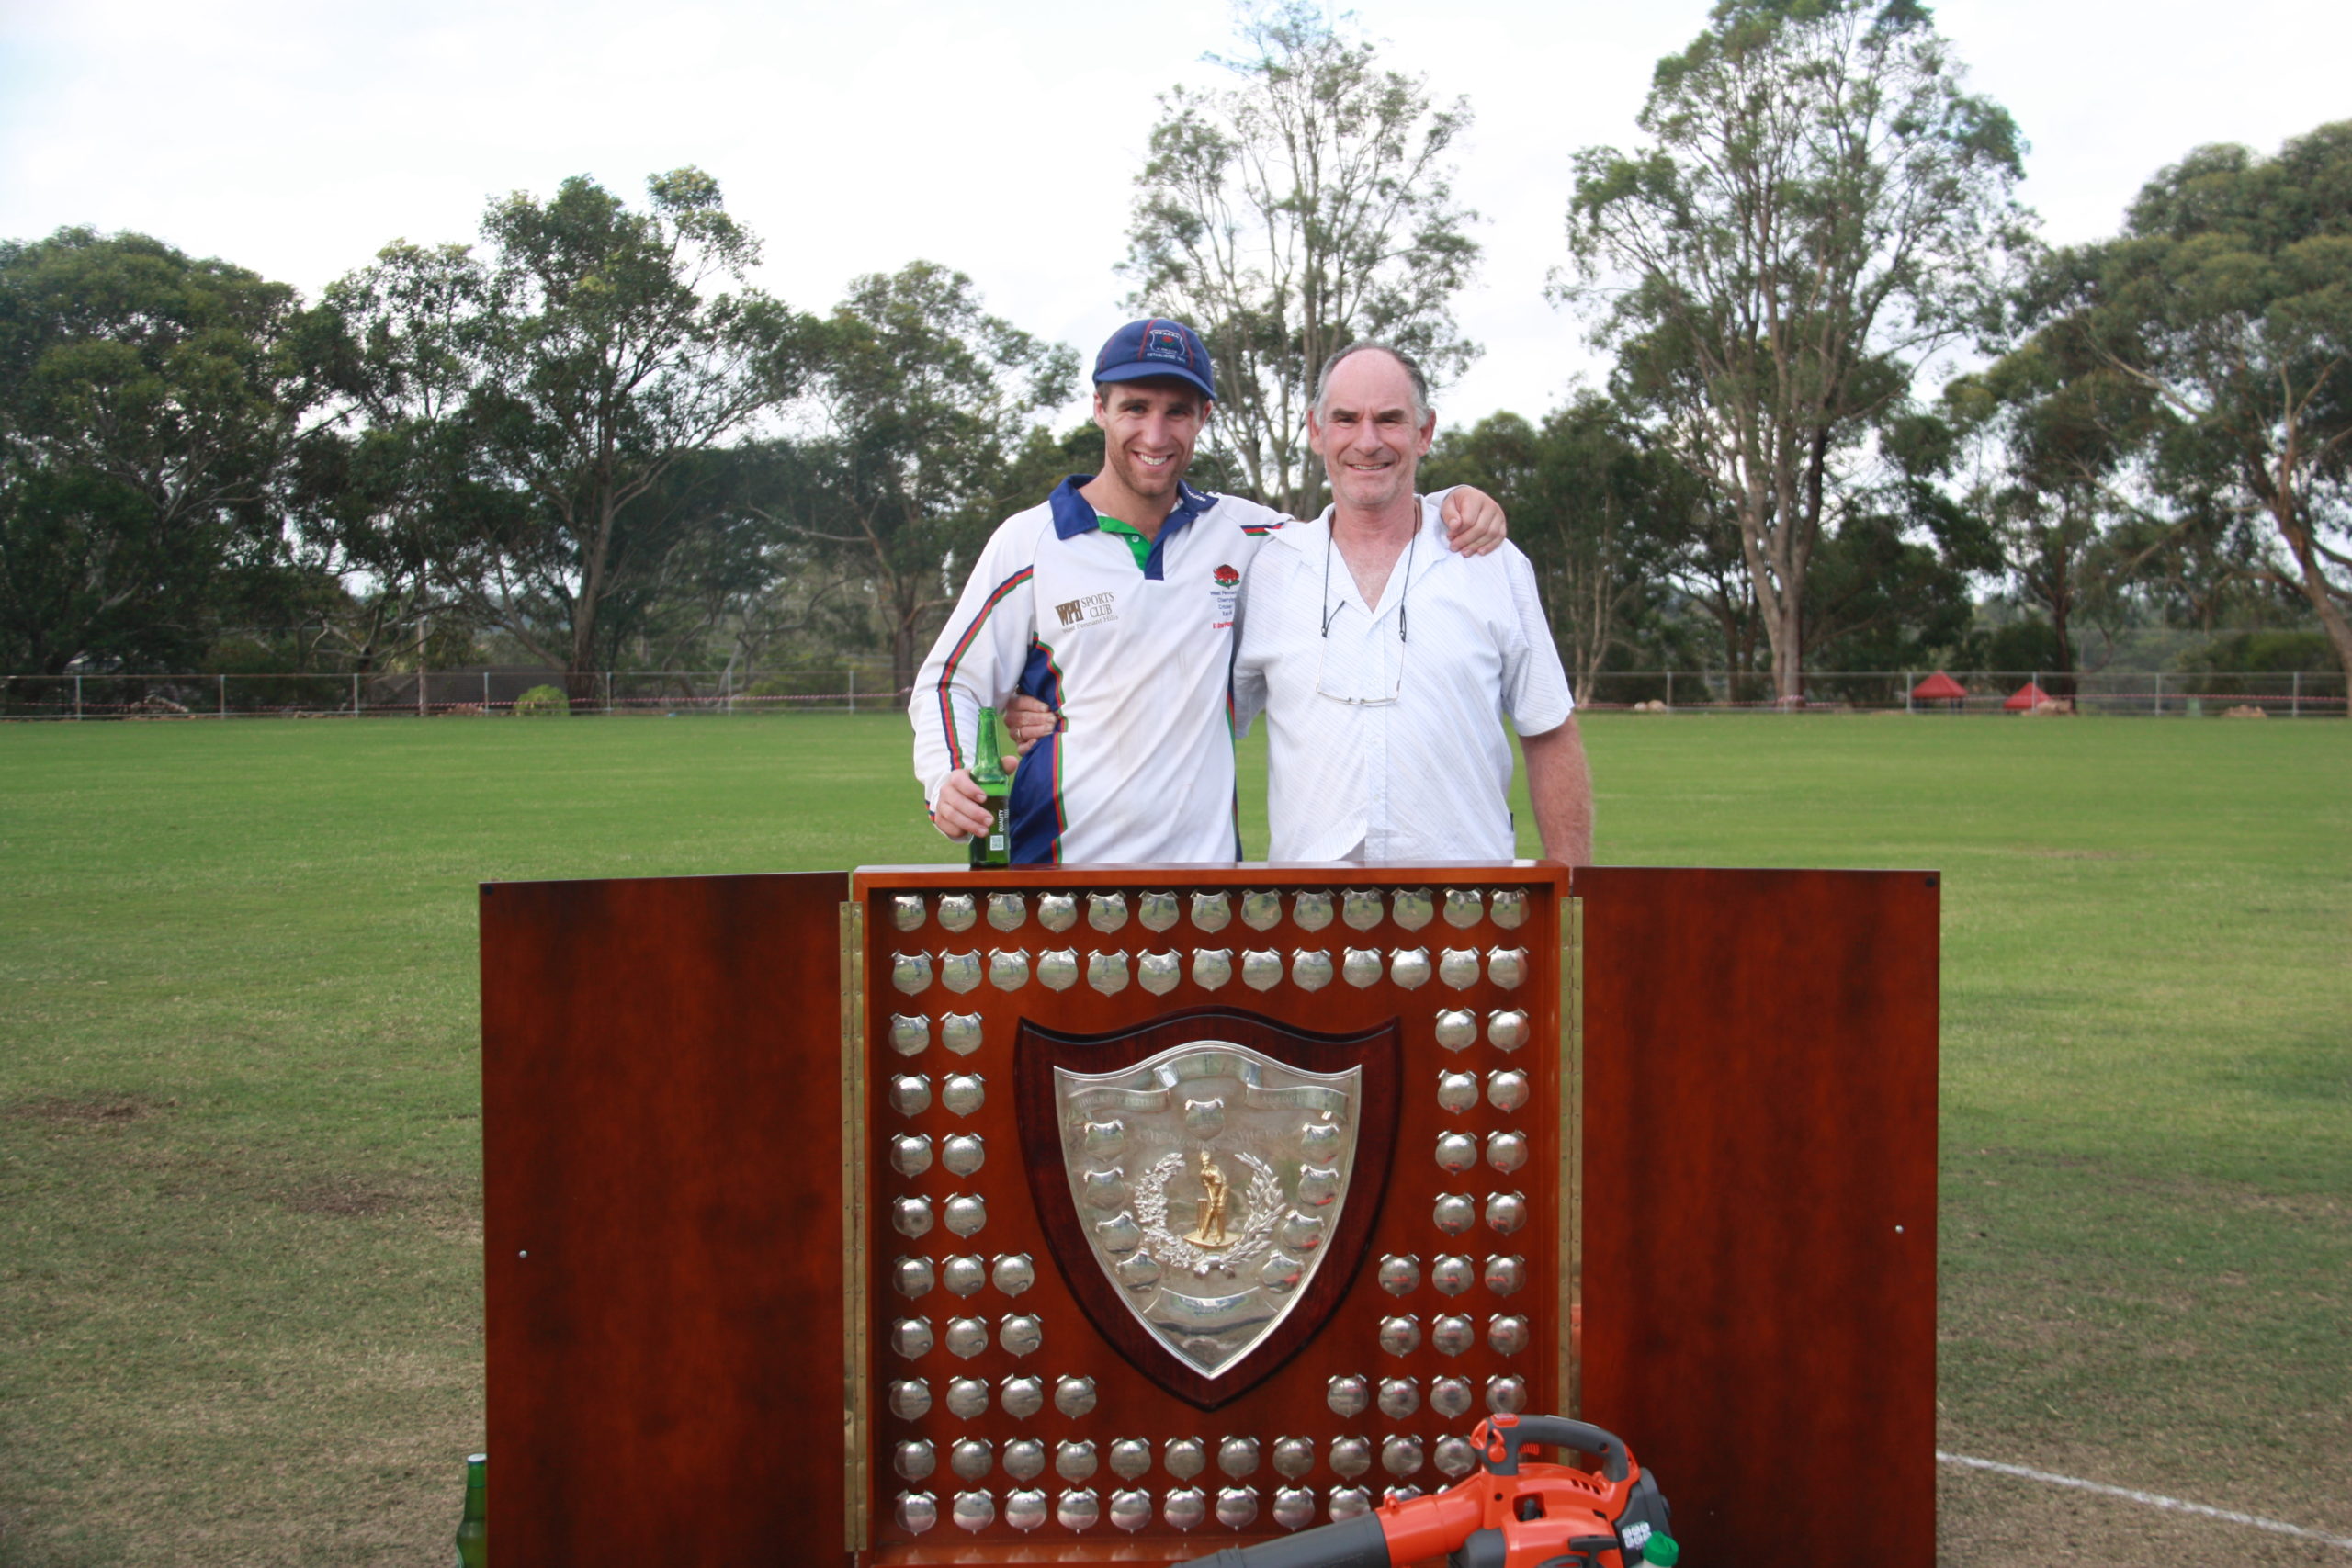 Stu Newman with his dad, Geoff - A1 Grand Final (Rofie 3) vs ARL @ Parklands Oval 29 and 30 March 2014